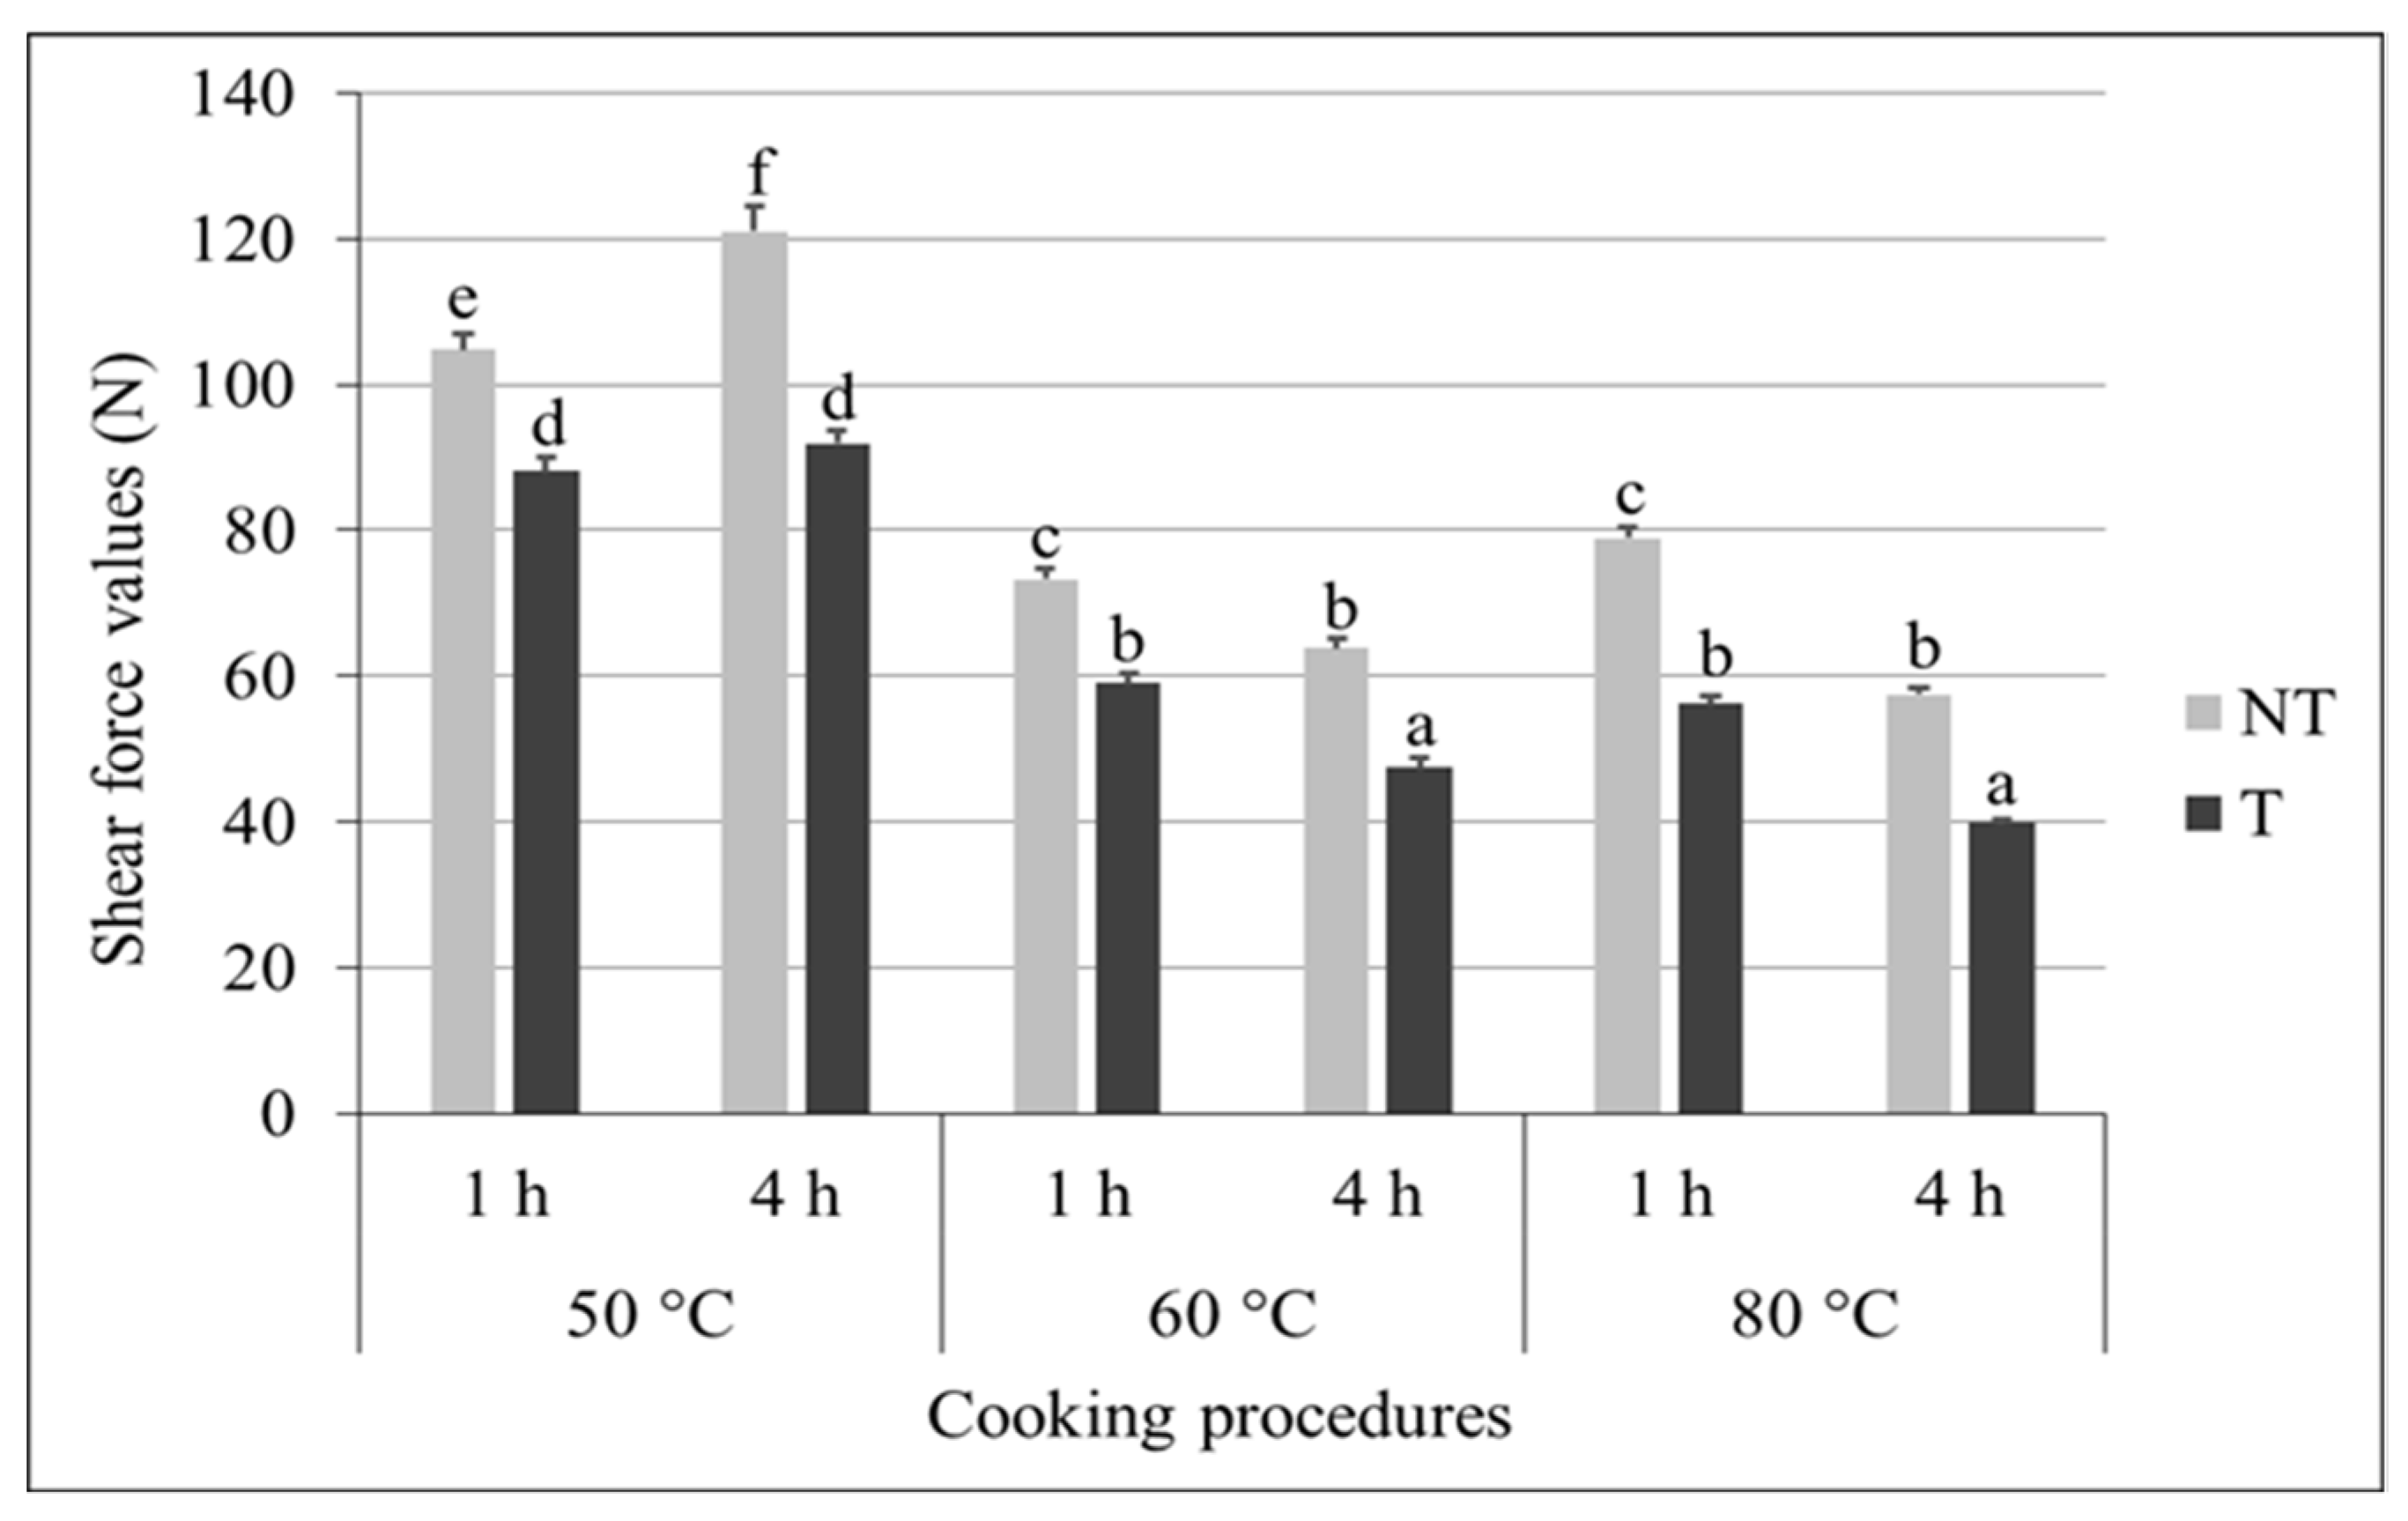 Processes | Free Full-Text | Impact of Combining Tumbling and Sous-Vide Cooking Processes on the Tenderness, Losses and Colour Bovine Meat